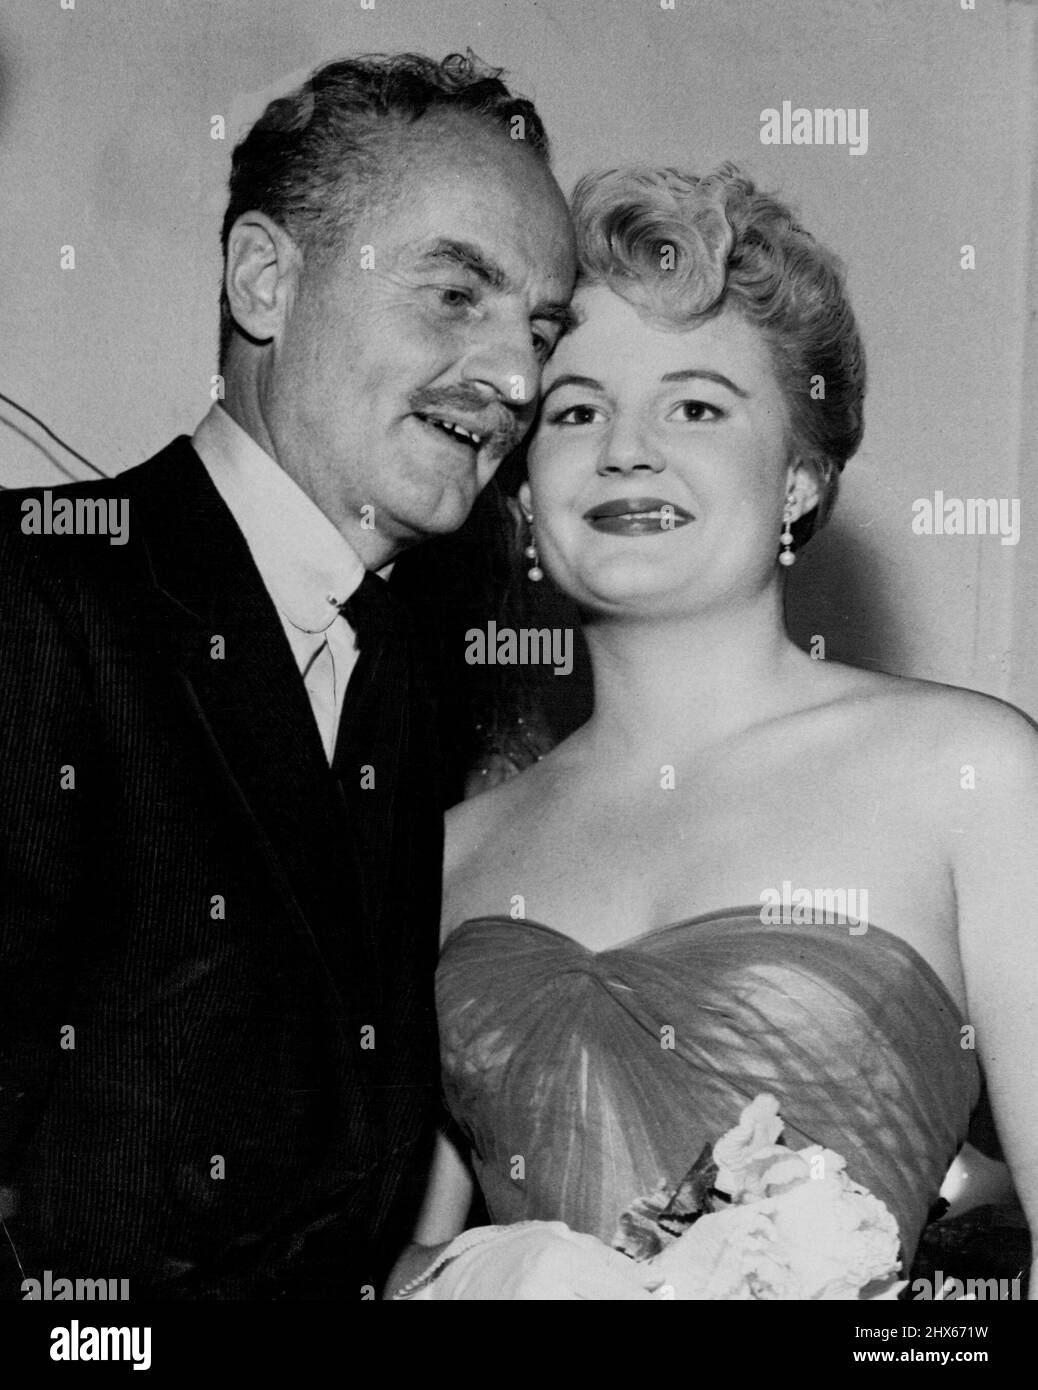 The enclosed picture of Miss Susan Zanuck shown with her producer father, 20th Century-Fox's Darryl F. Zanuck, is sent to you at the request of Mr. Harold Hefferman, N. A. N. A., to accompany his column of May 12. Miss Zanuck recently made her nightclub night club debut at the El Rancho Vegas in Las Vegas. July 27, 1953. Stock Photo